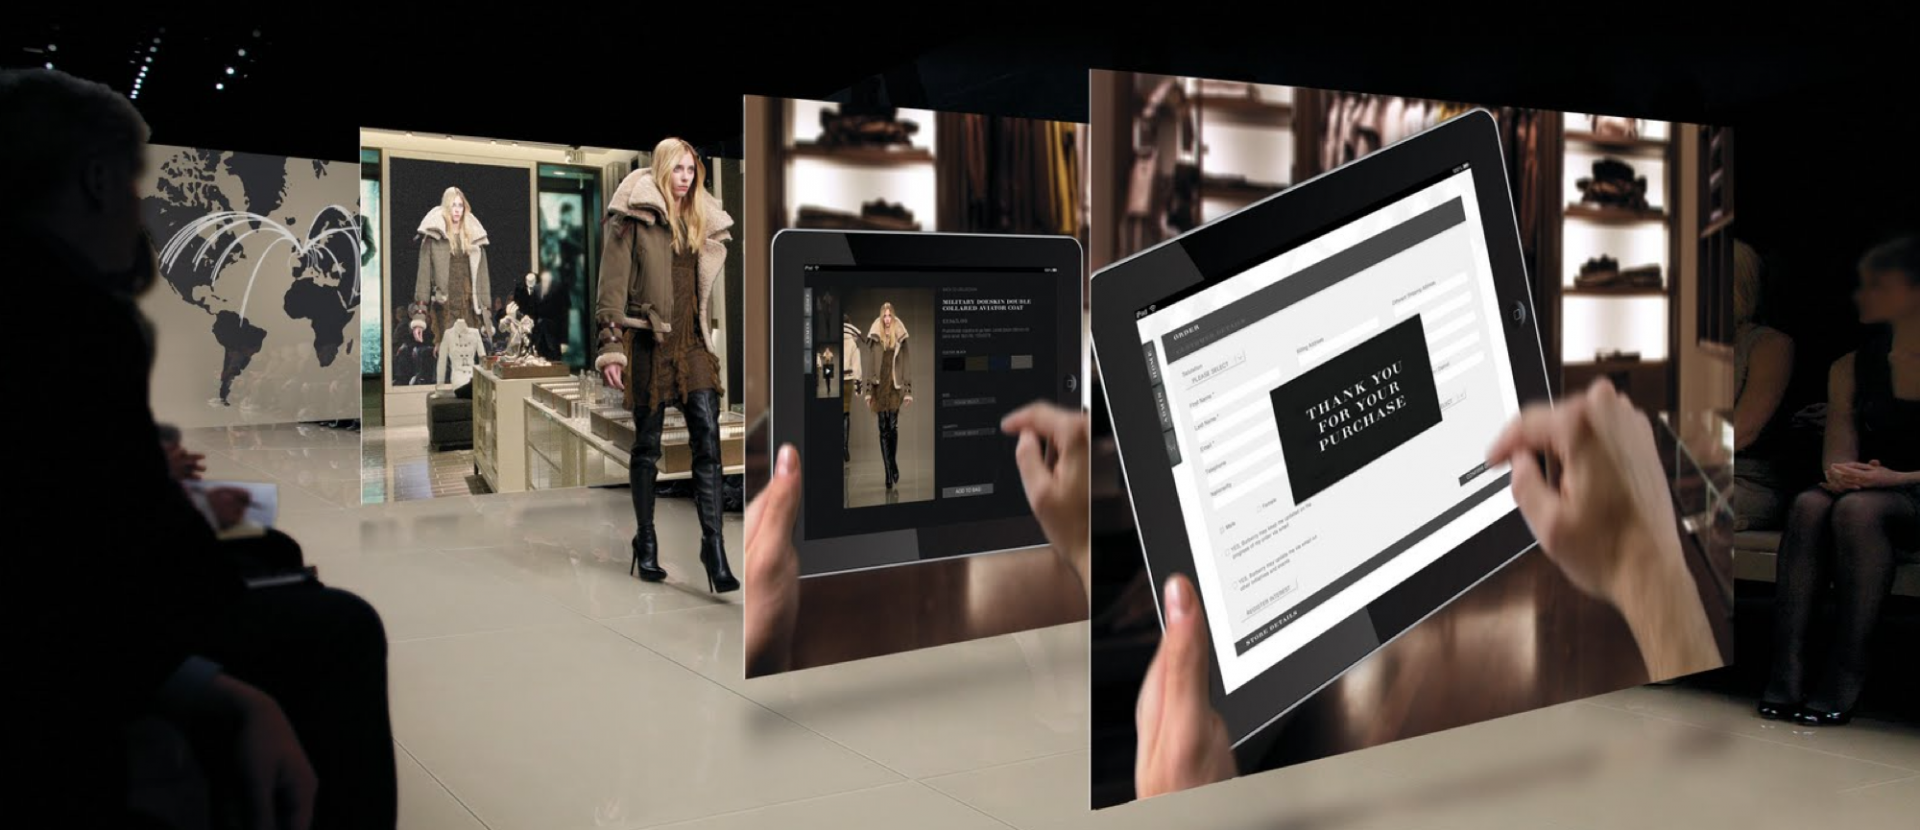 Invested Secoo, LVMH Plans to Roll out Luxury E-Commerce